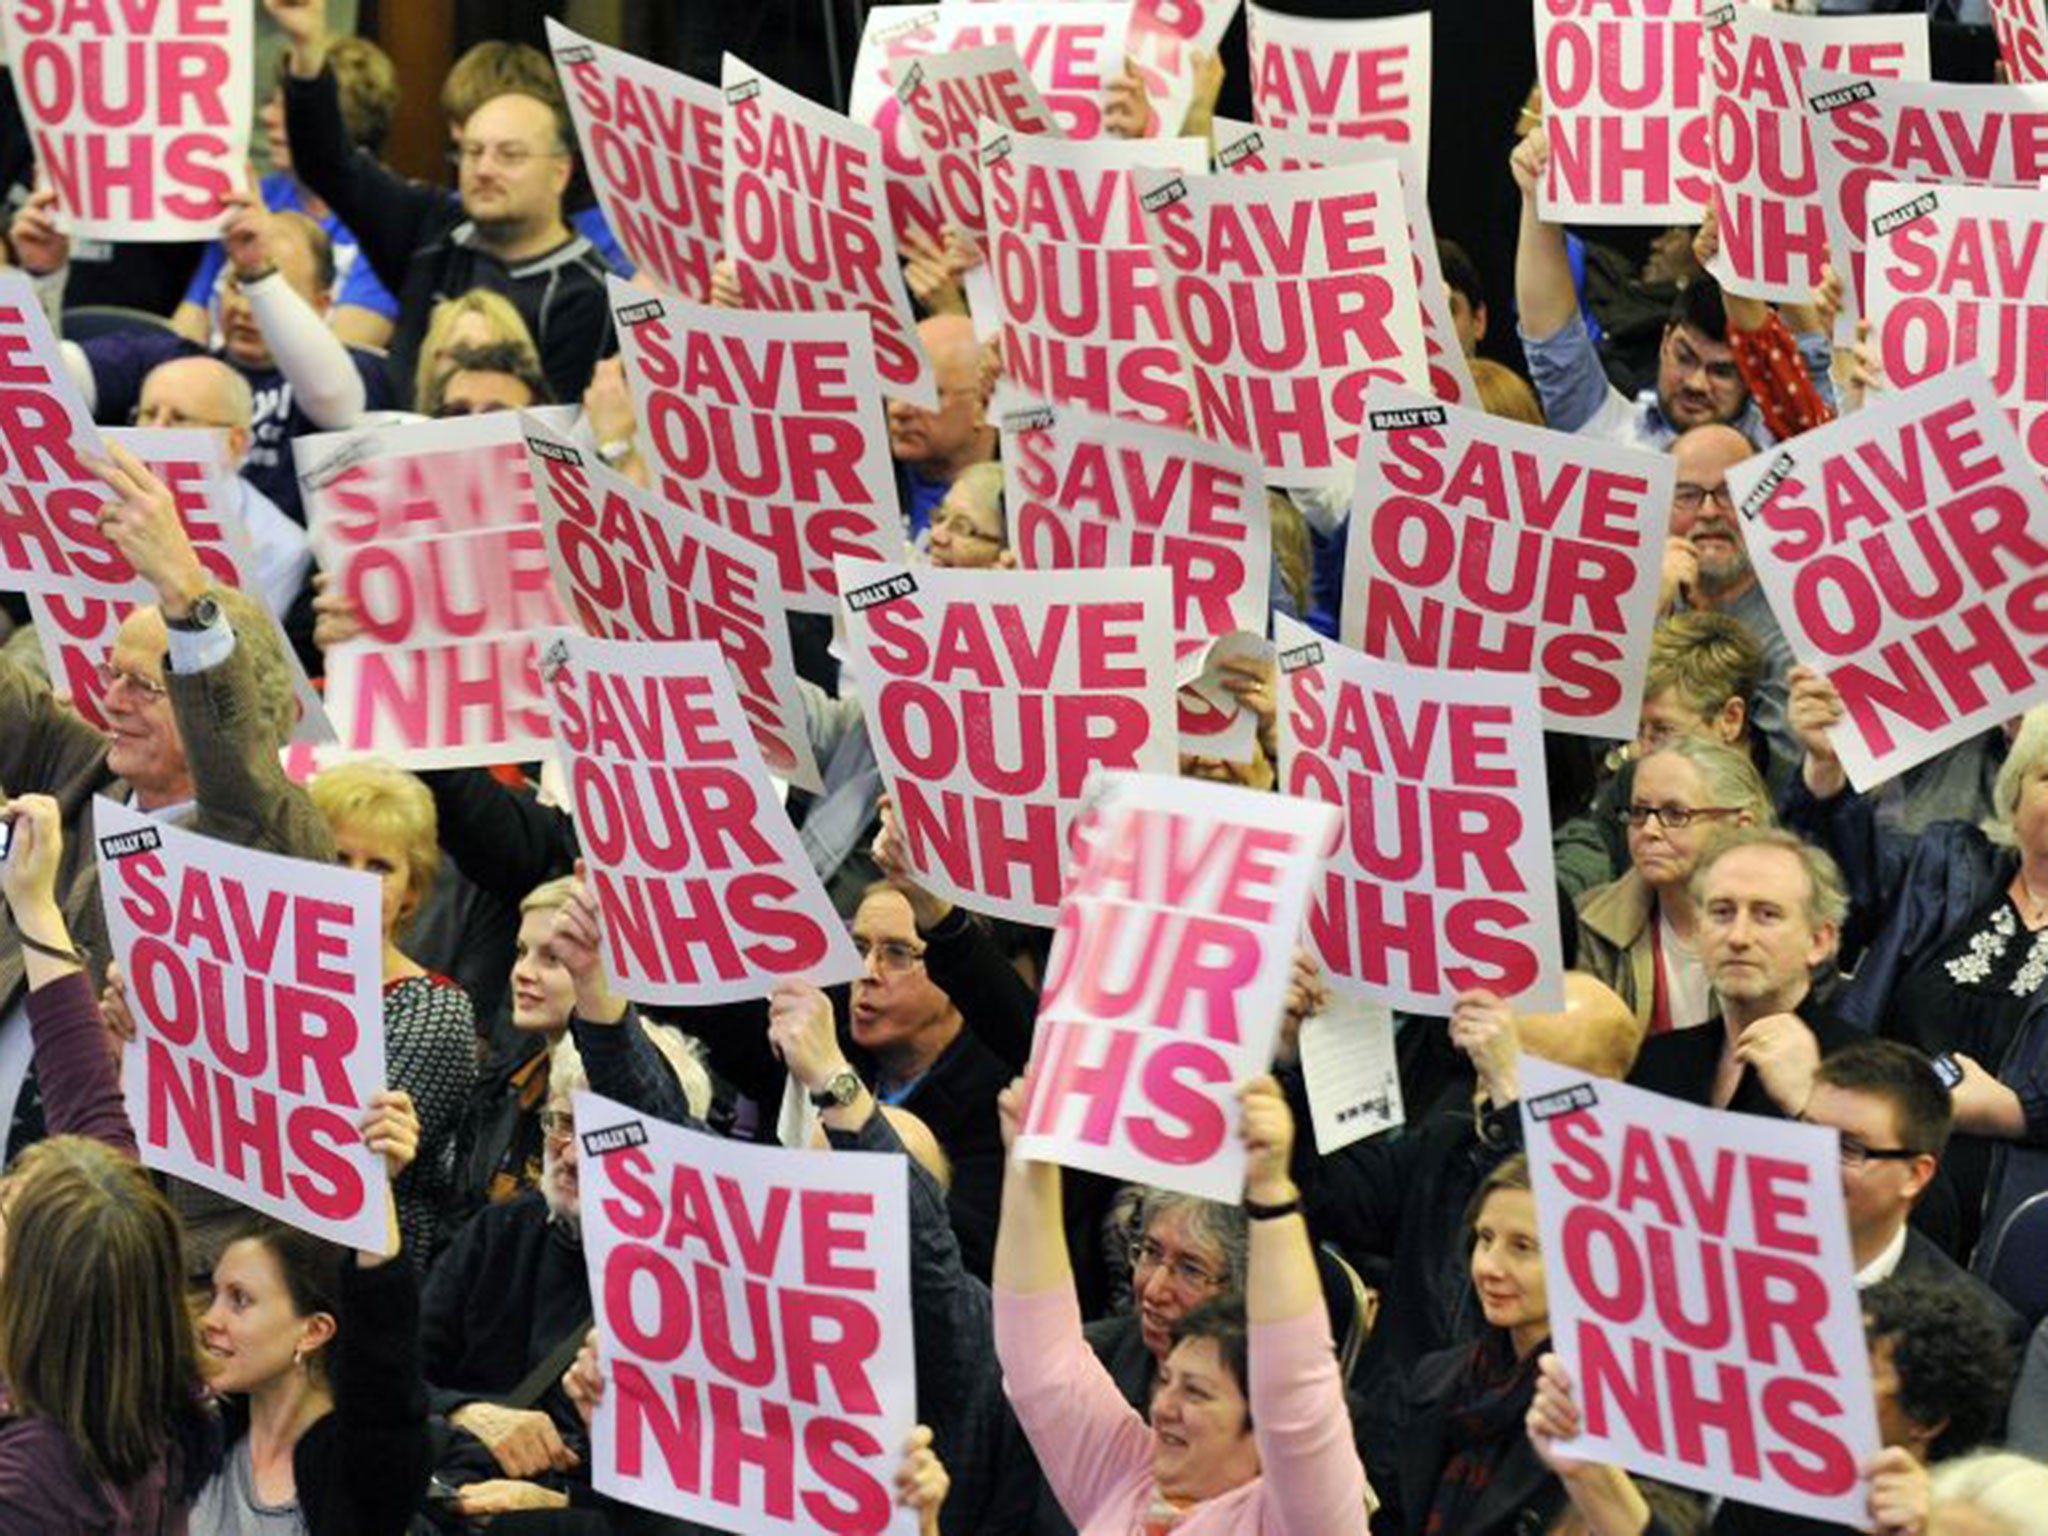 Figures released at the end of last week revealed that the NHS has worked up a £500m deficit in the first three months of this financial year